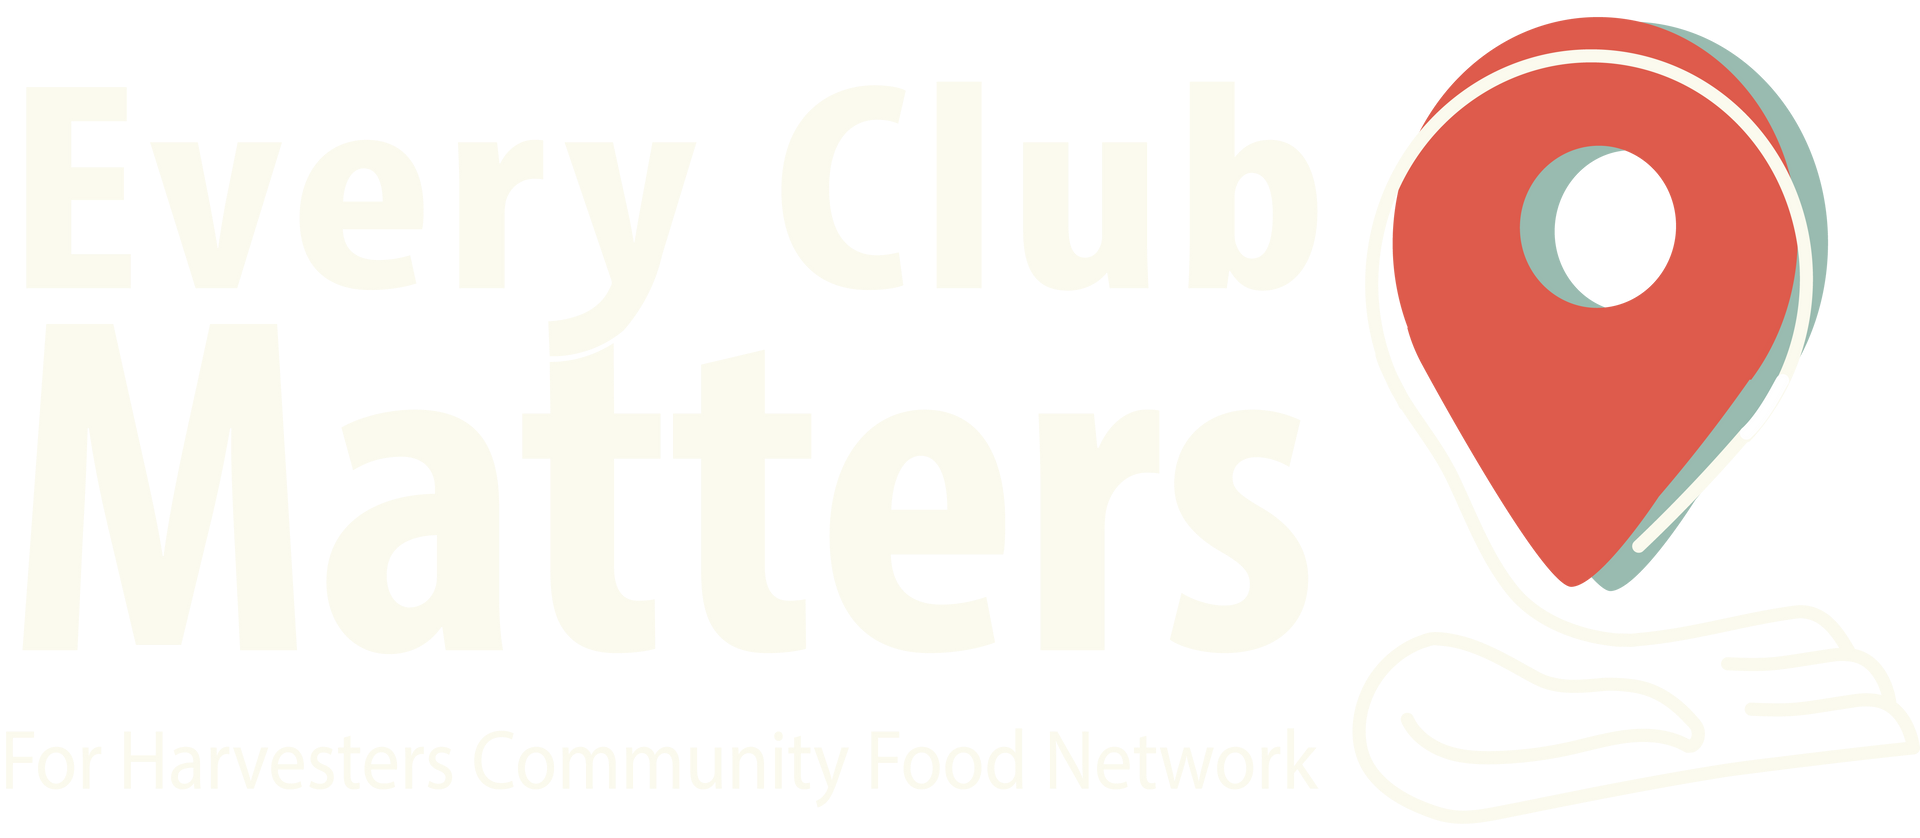 Every Lunch Matters for Harvester's Community Food Network